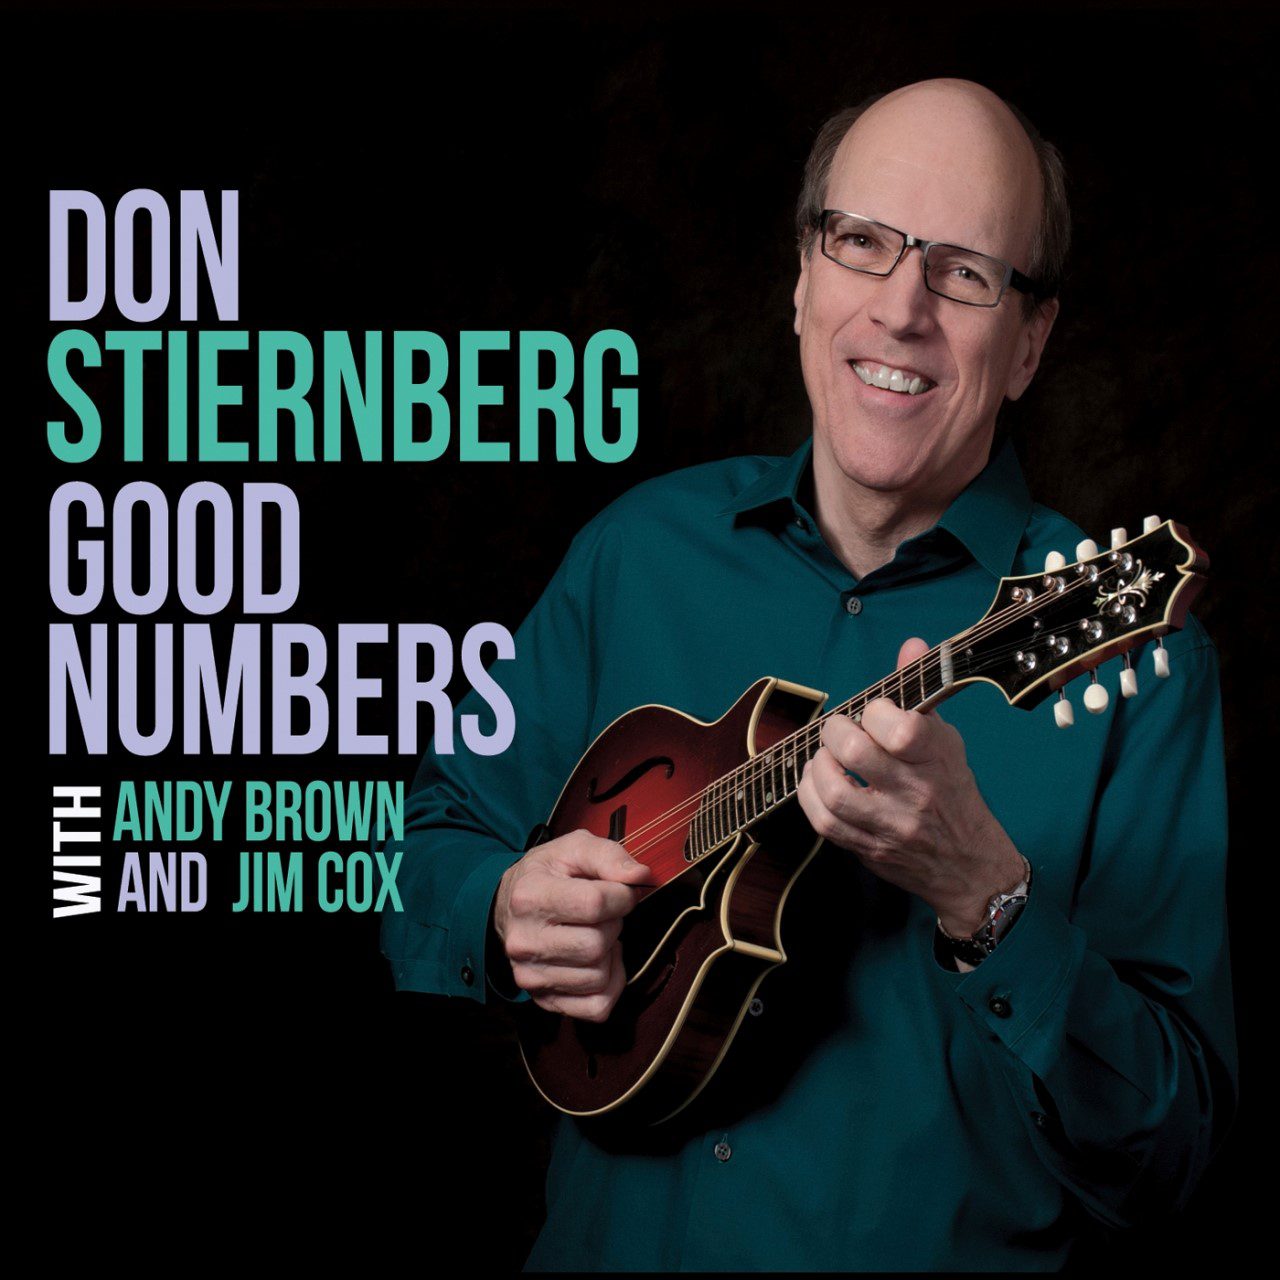 Don Stiernberg - Good Numbers cover album